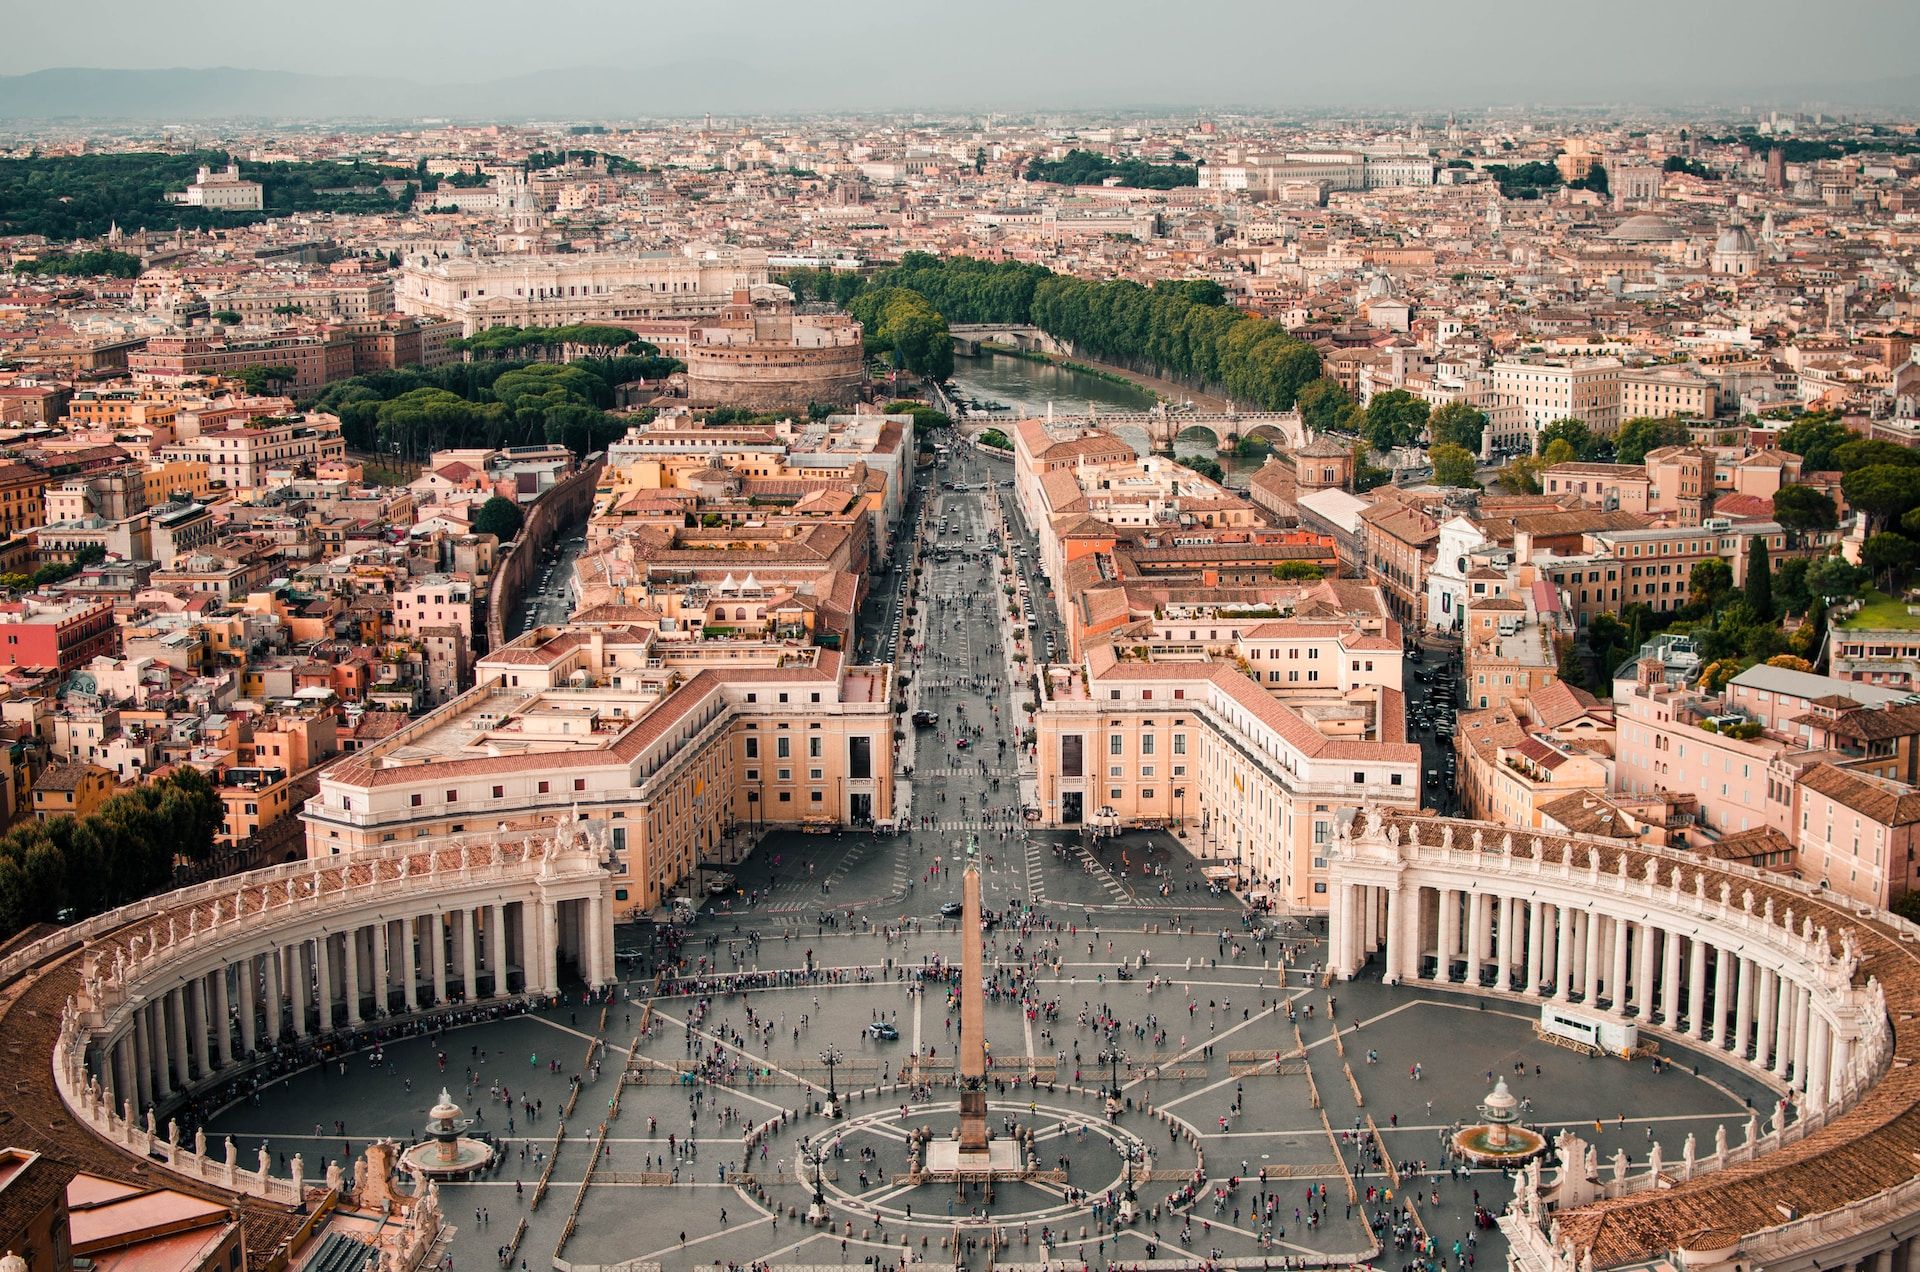 The Top View Of Vatican City, Rome